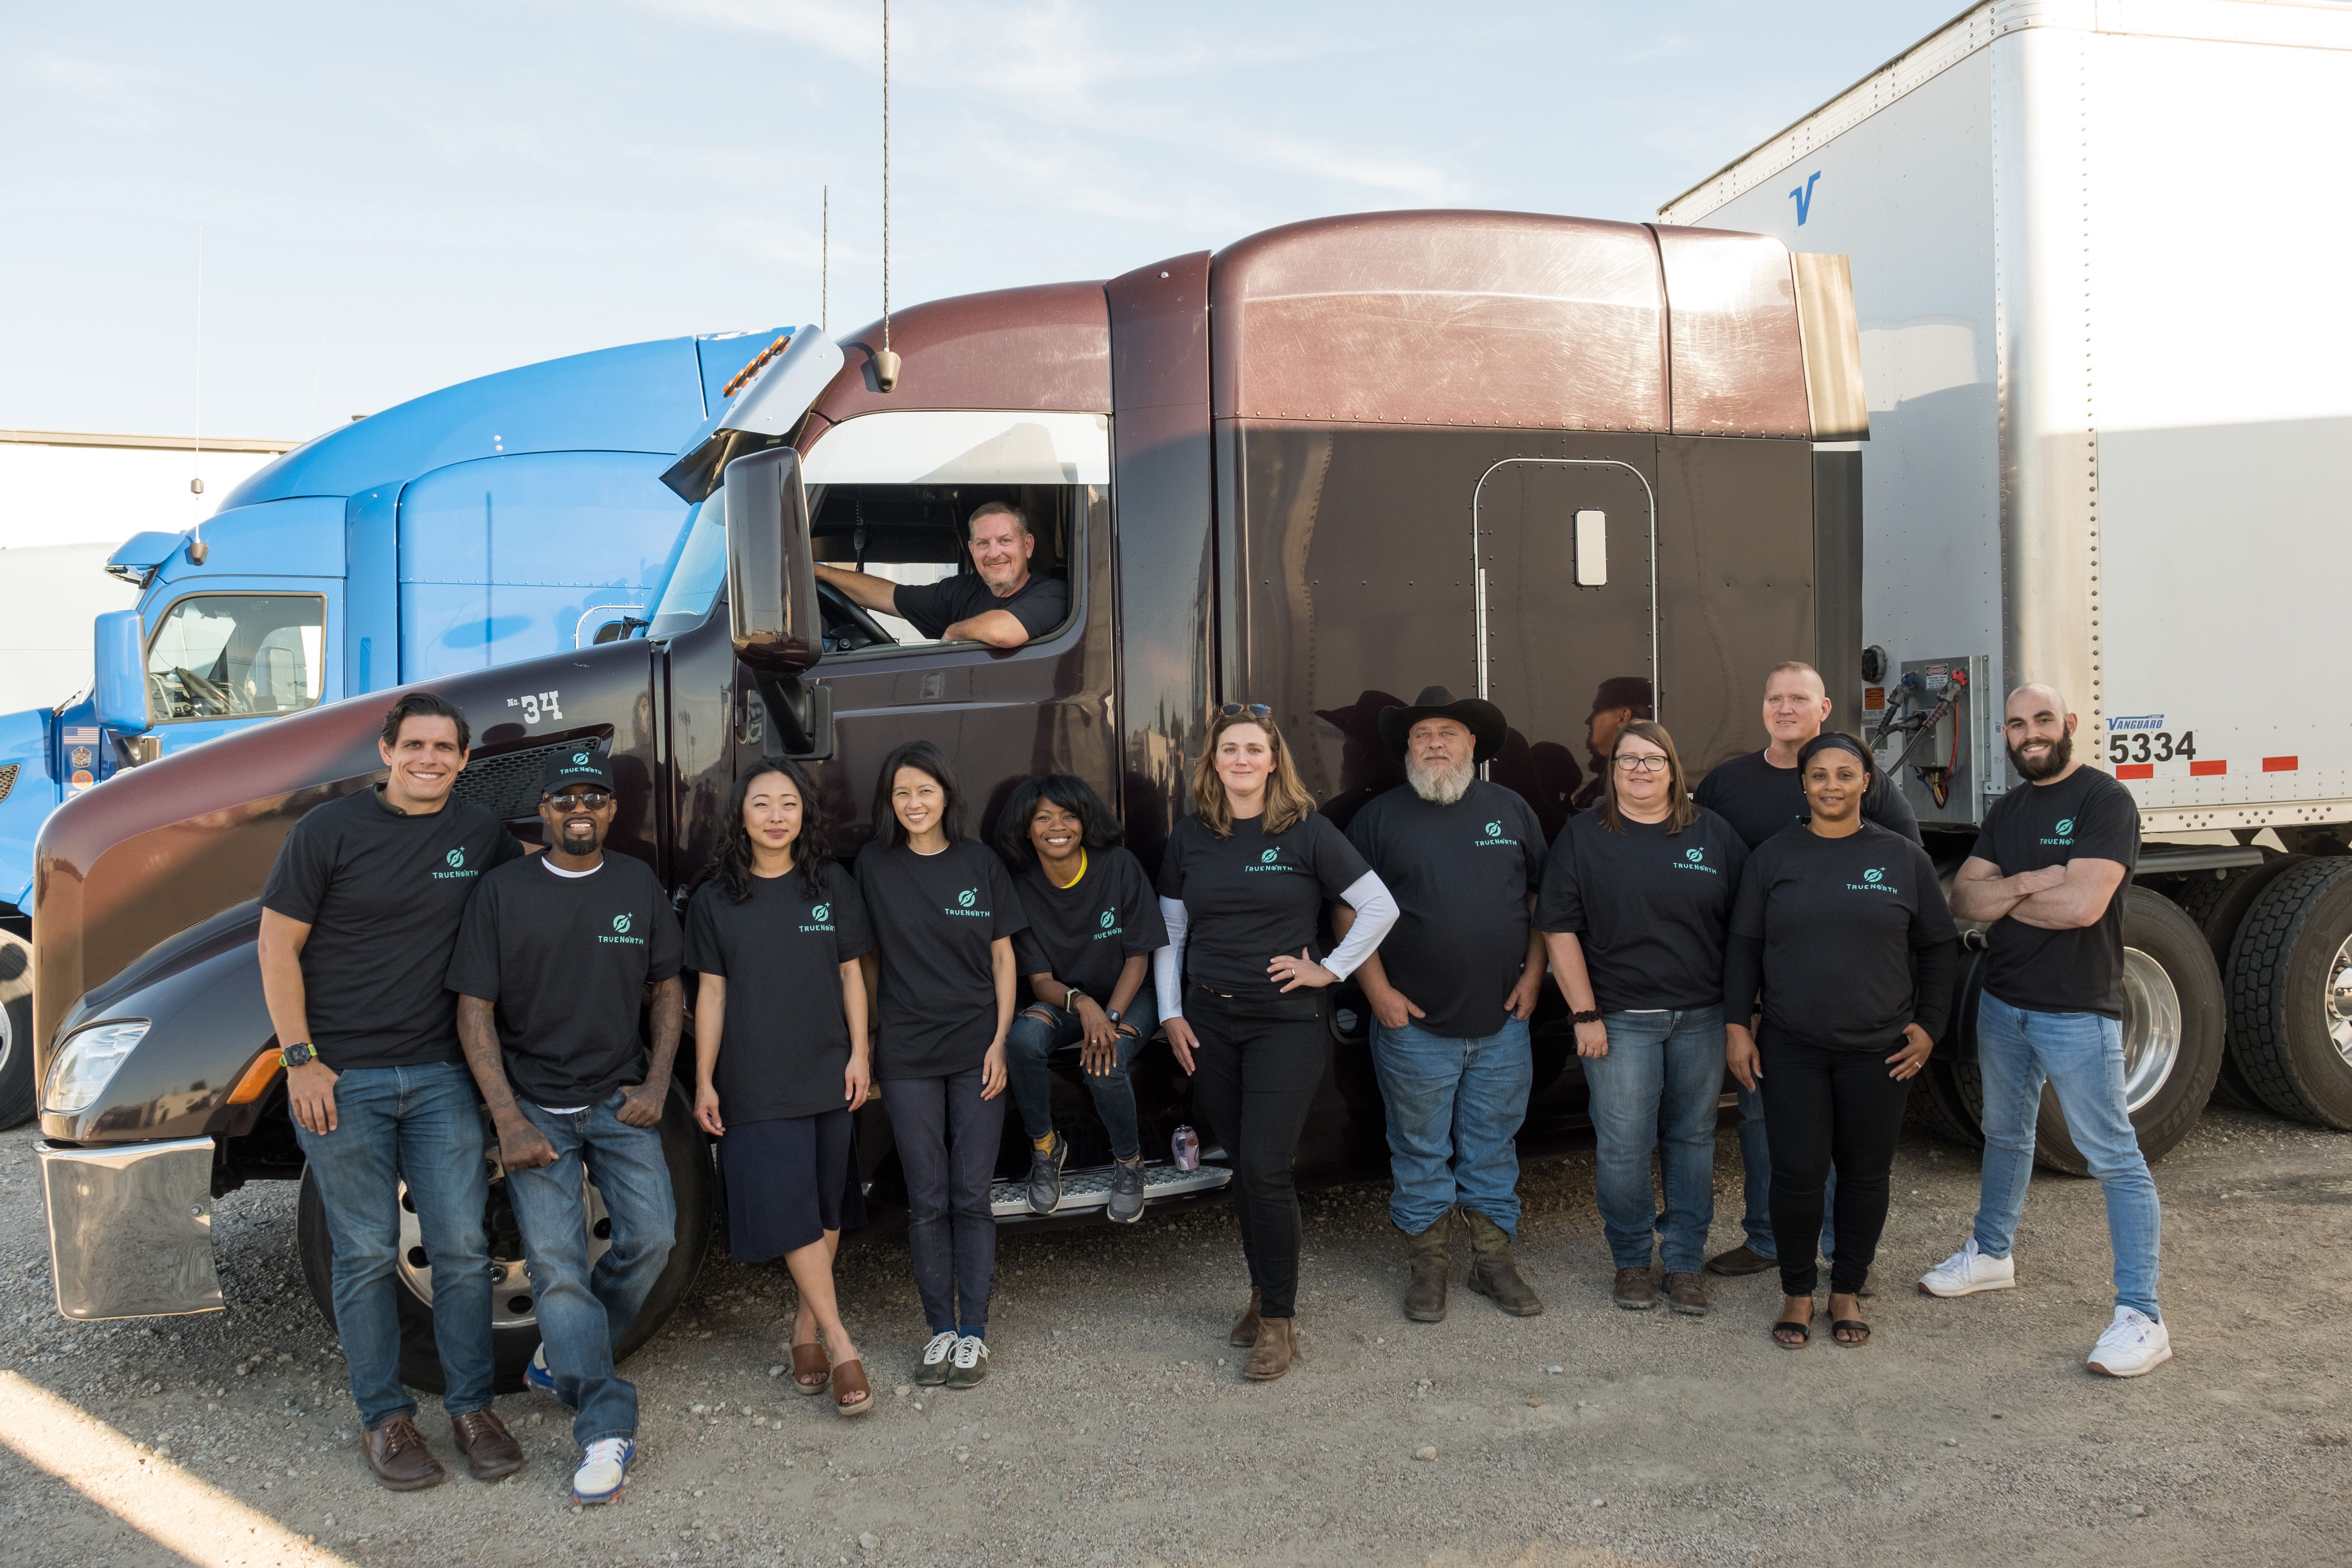 TrueNorth has raised $50 million from Sam Altman and others to empower independent truckers